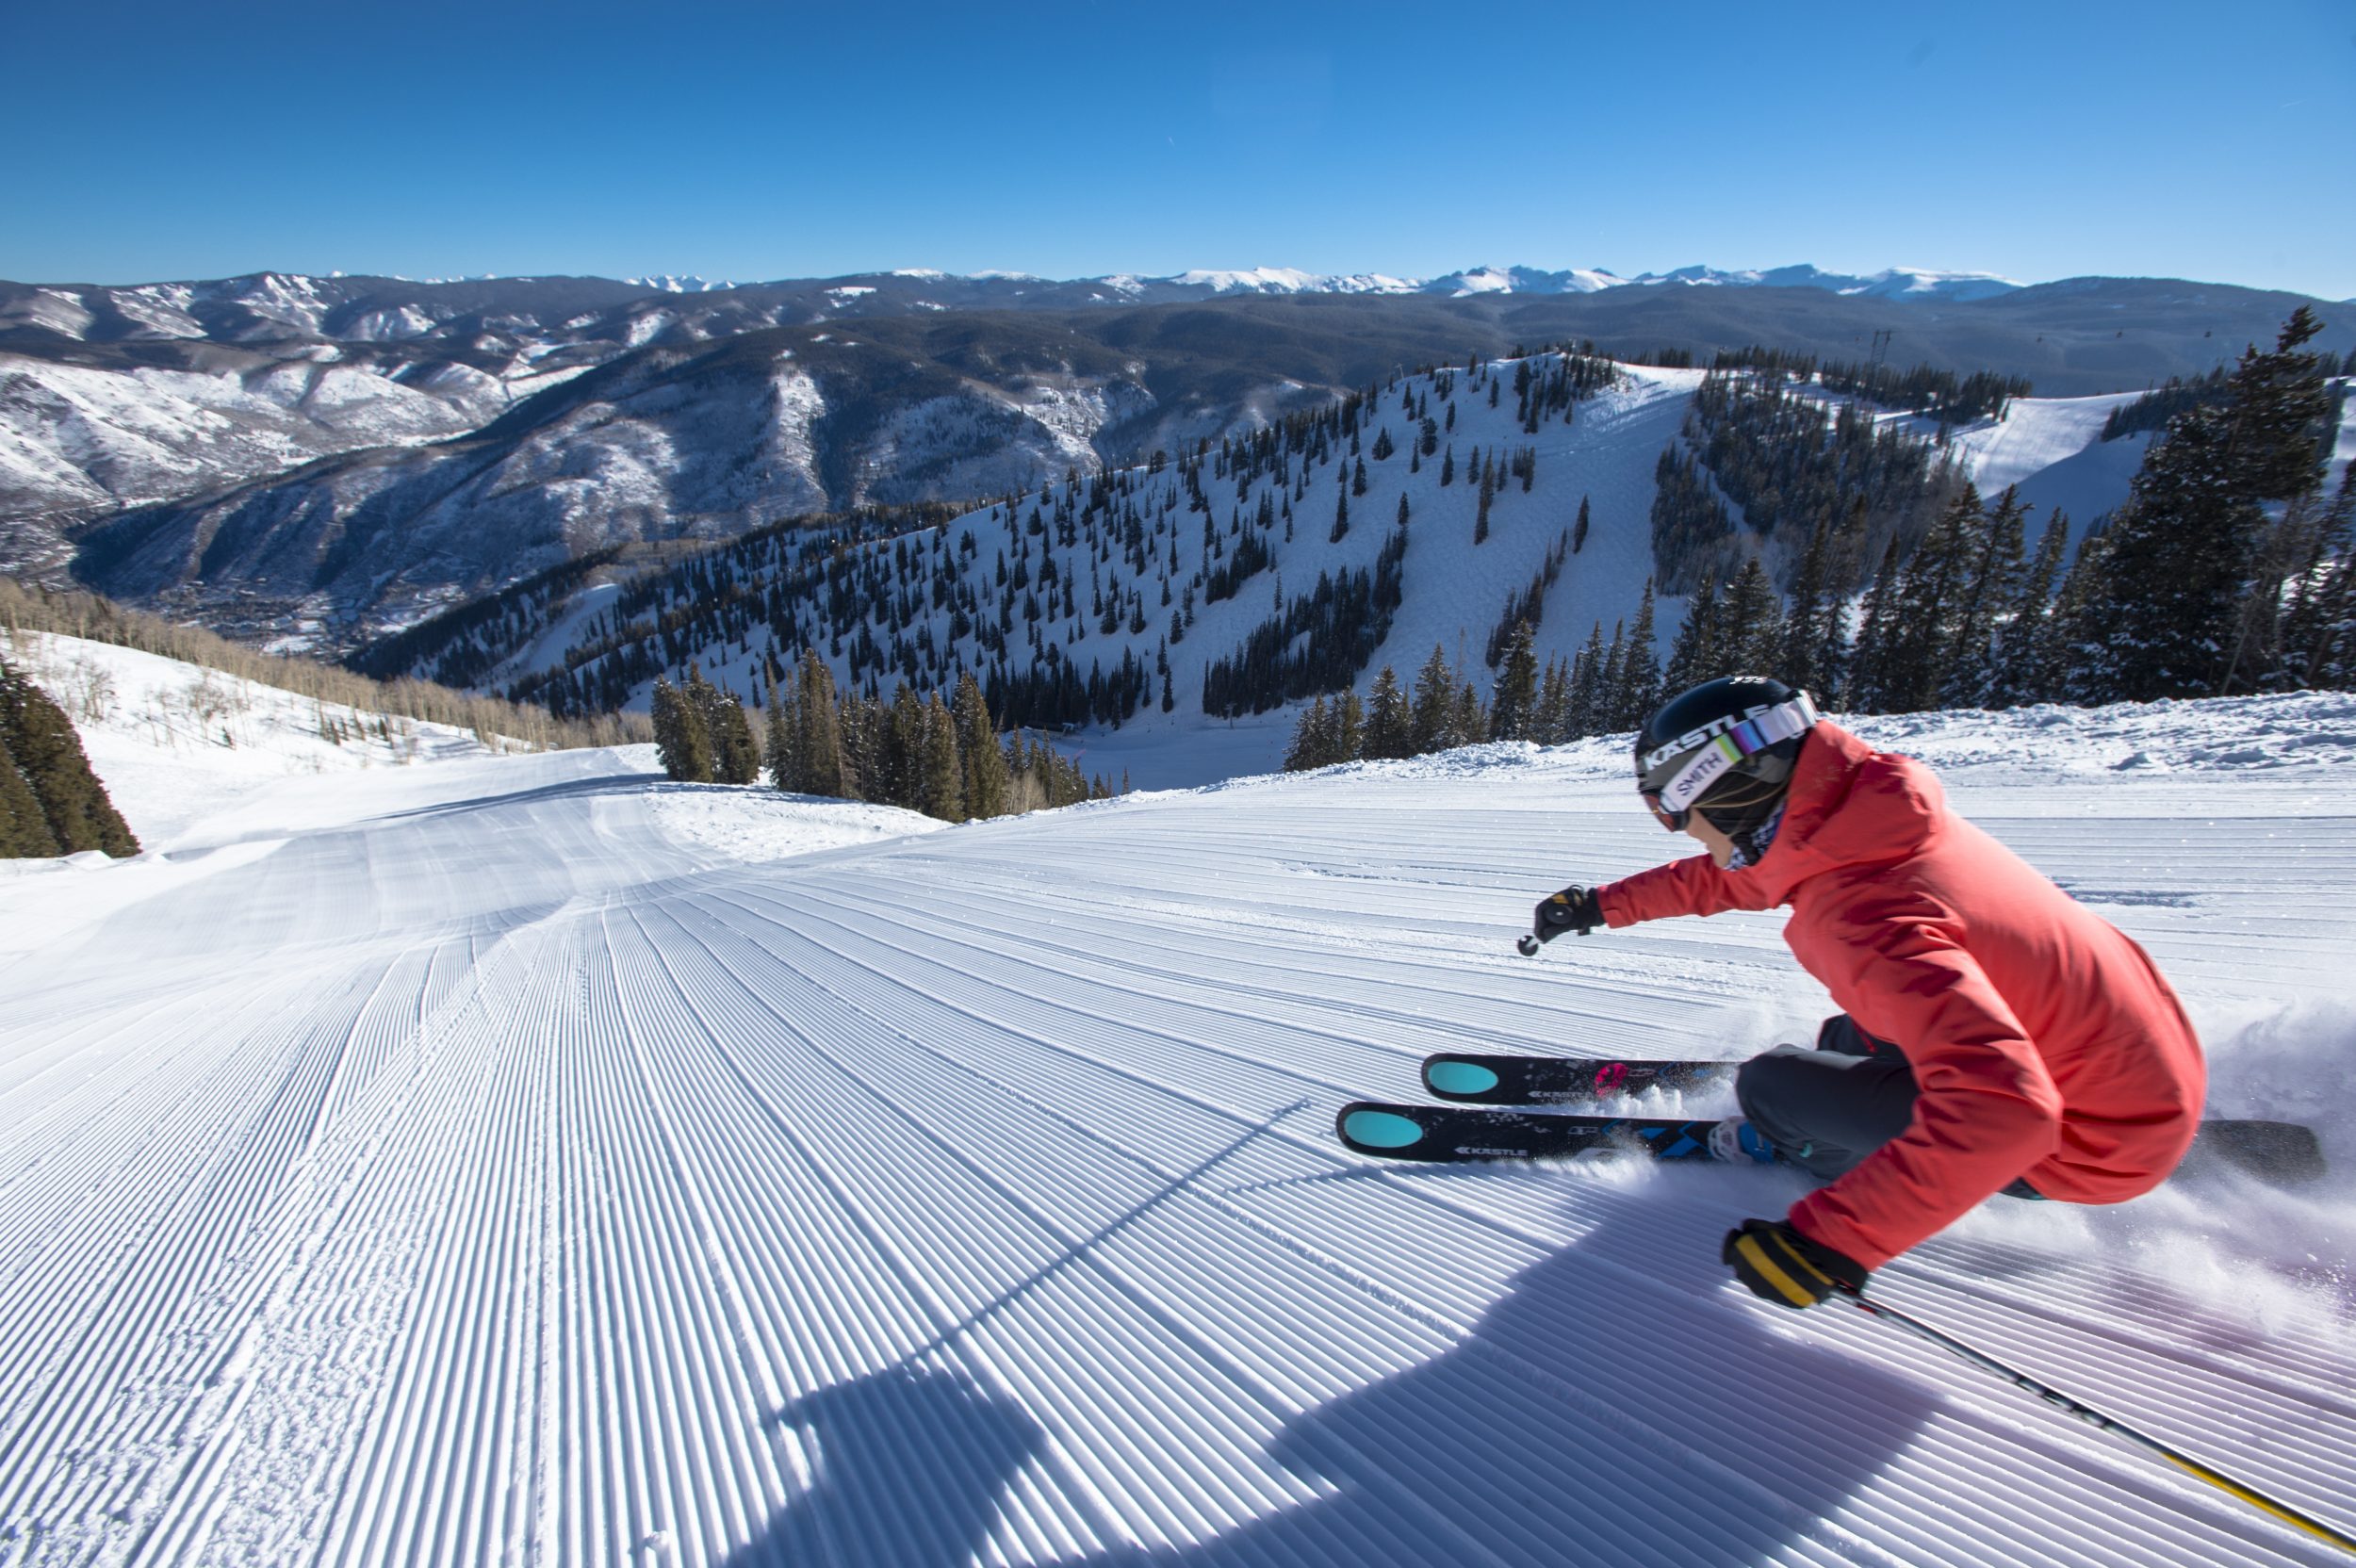 Darcy Conover skiing fresh corduroy down a steep snow covered groomed slope in the mountains at Aspen Mountain Ski Resort in Colorado - Alterra expects to sell 250,000 Ikon ski passes while Vail Resorts Epic Pass sales are up thanks to the $99 military pass